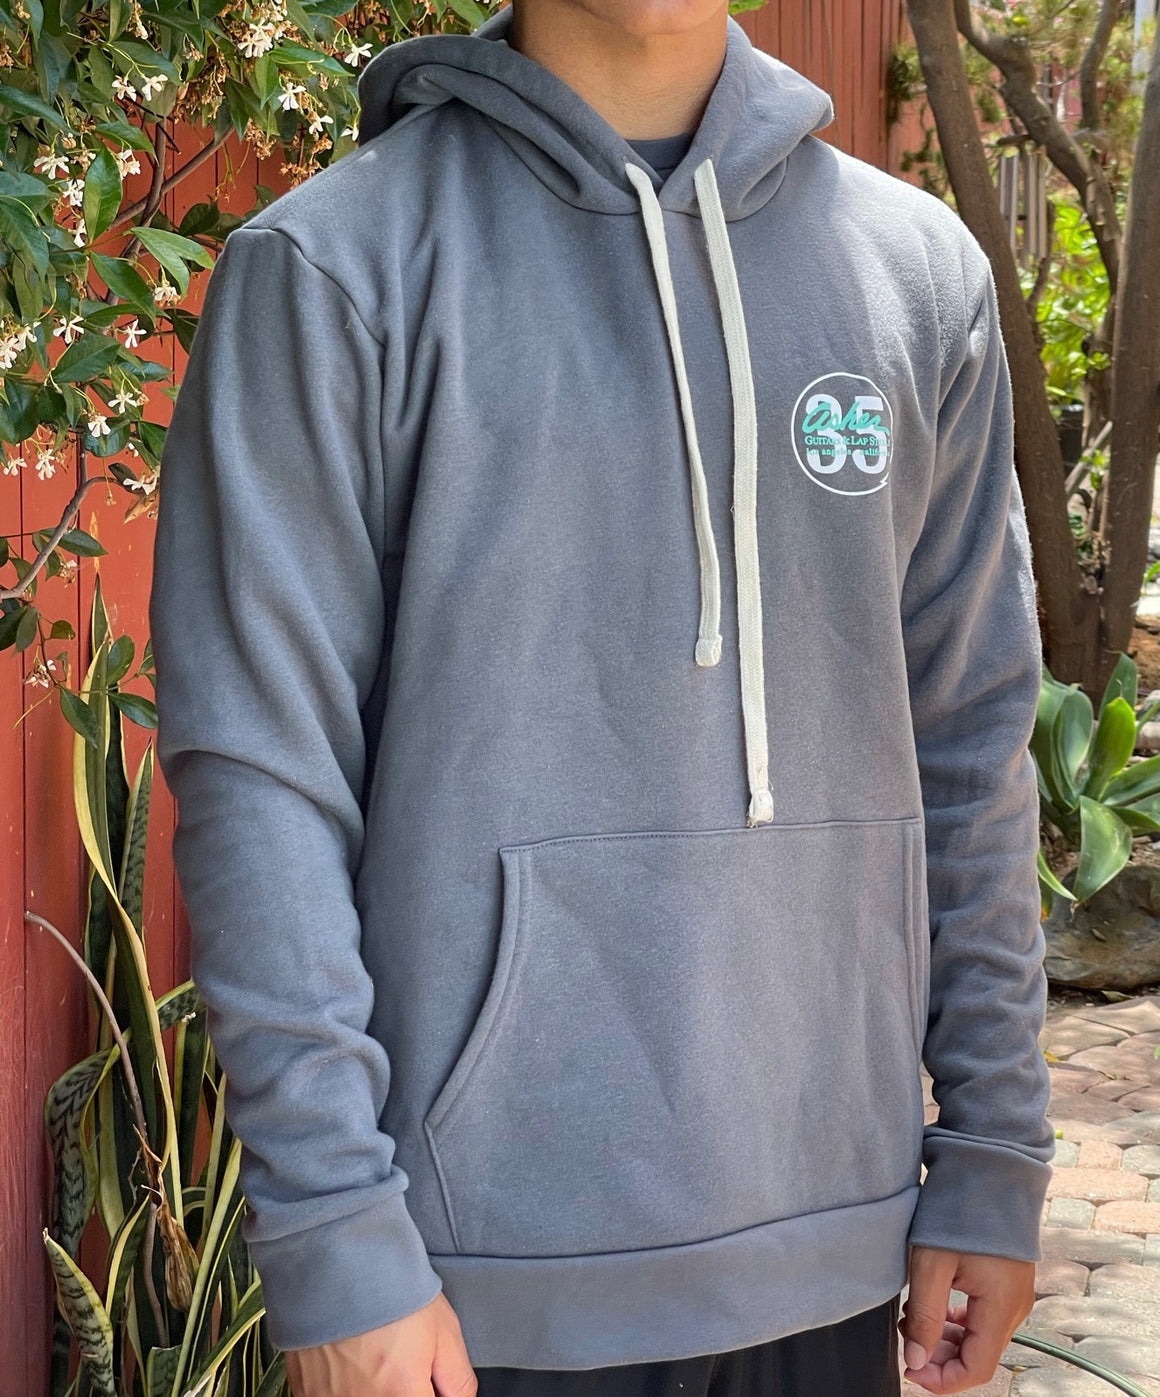 NEW Asher Guitars Hoodie, Unisex - Super Soft and Cozy!